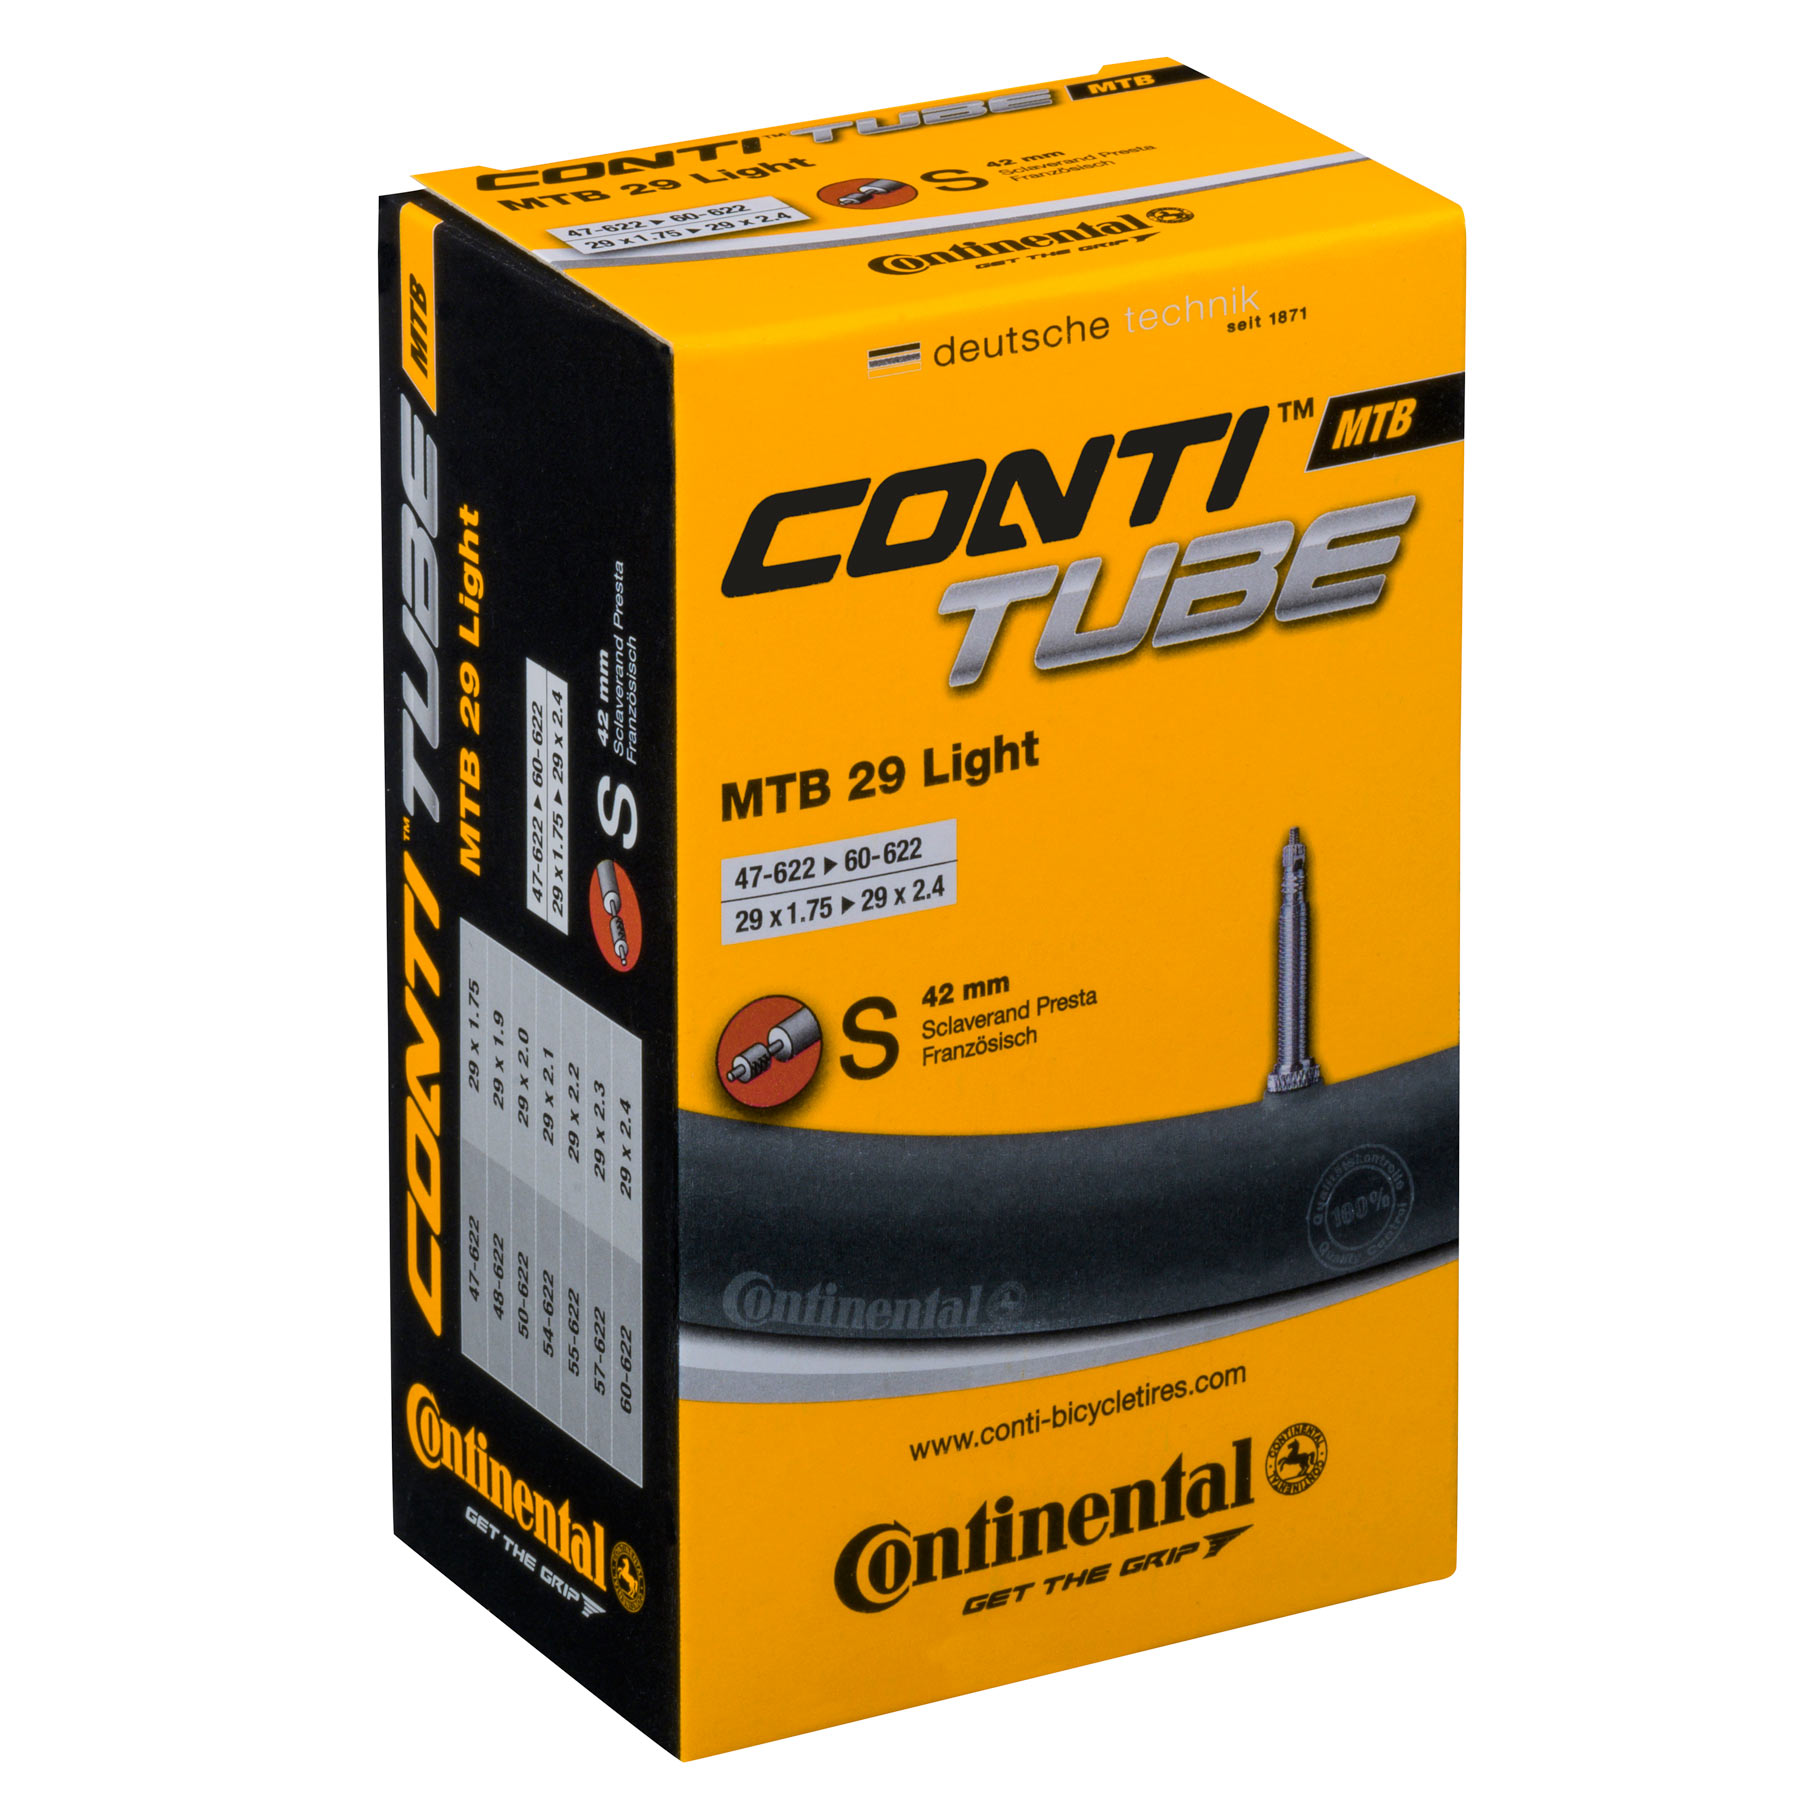 Picture of Continental MTB 29 Light Tube